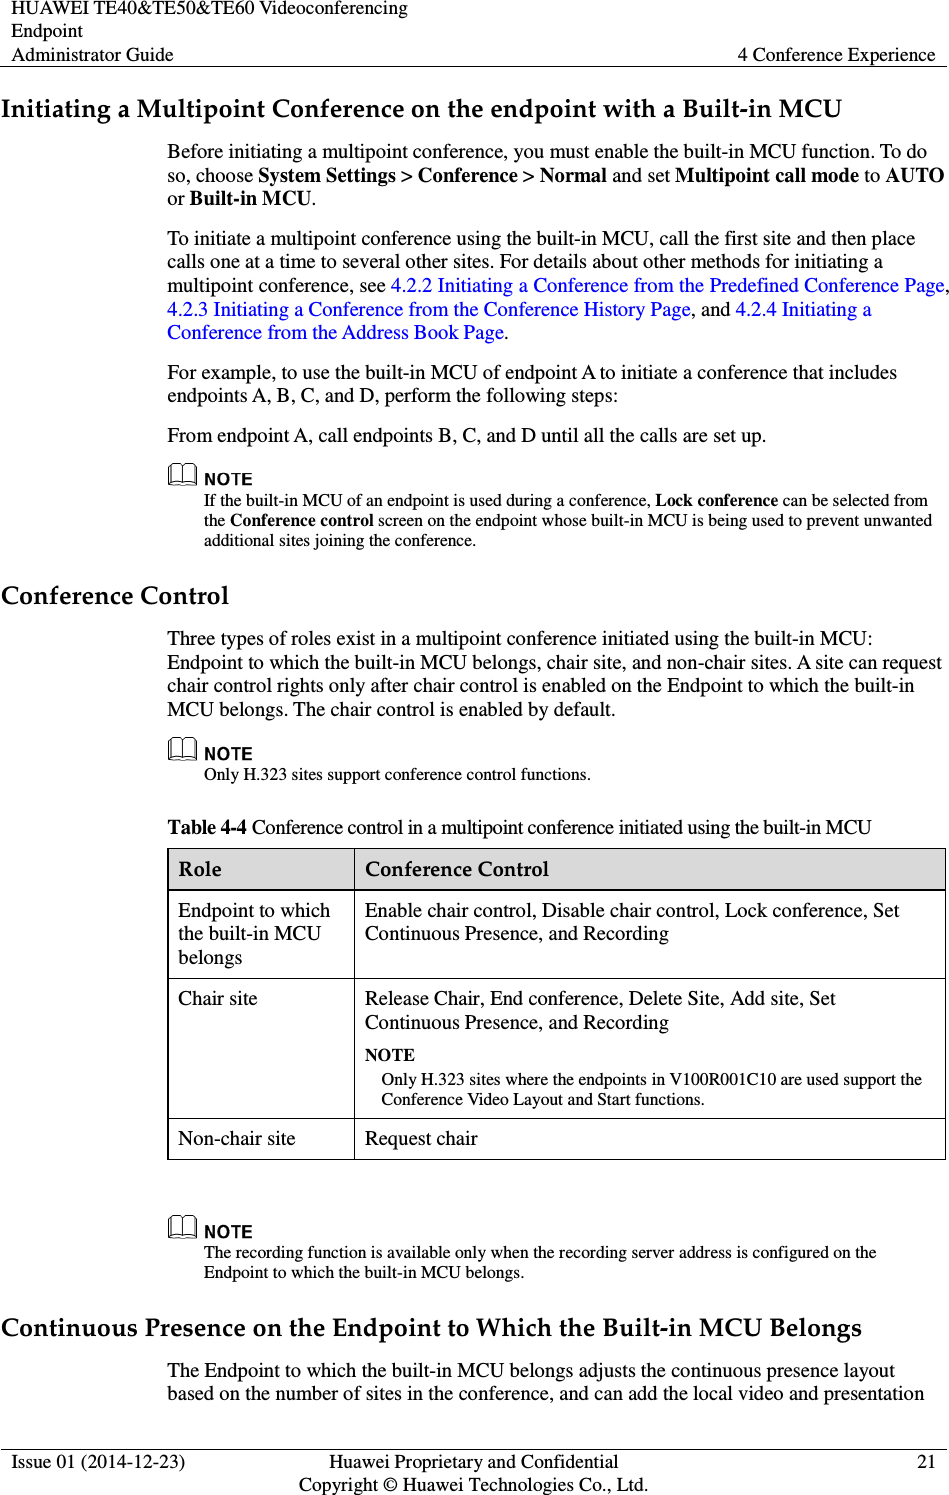 HUAWEI TE40&amp;TE50&amp;TE60 Videoconferencing Endpoint Administrator Guide  4 Conference Experience  Issue 01 (2014-12-23)  Huawei Proprietary and Confidential                                     Copyright © Huawei Technologies Co., Ltd. 21  Initiating a Multipoint Conference on the endpoint with a Built-in MCU Before initiating a multipoint conference, you must enable the built-in MCU function. To do so, choose System Settings &gt; Conference &gt; Normal and set Multipoint call mode to AUTO or Built-in MCU. To initiate a multipoint conference using the built-in MCU, call the first site and then place calls one at a time to several other sites. For details about other methods for initiating a multipoint conference, see 4.2.2 Initiating a Conference from the Predefined Conference Page, 4.2.3 Initiating a Conference from the Conference History Page, and 4.2.4 Initiating a Conference from the Address Book Page.   For example, to use the built-in MCU of endpoint A to initiate a conference that includes endpoints A, B, C, and D, perform the following steps: From endpoint A, call endpoints B, C, and D until all the calls are set up.  If the built-in MCU of an endpoint is used during a conference, Lock conference can be selected from the Conference control screen on the endpoint whose built-in MCU is being used to prevent unwanted additional sites joining the conference. Conference Control Three types of roles exist in a multipoint conference initiated using the built-in MCU: Endpoint to which the built-in MCU belongs, chair site, and non-chair sites. A site can request chair control rights only after chair control is enabled on the Endpoint to which the built-in MCU belongs. The chair control is enabled by default.    Only H.323 sites support conference control functions. Table 4-4 Conference control in a multipoint conference initiated using the built-in MCU Role  Conference Control Endpoint to which the built-in MCU belongs Enable chair control, Disable chair control, Lock conference, Set Continuous Presence, and Recording Chair site  Release Chair, End conference, Delete Site, Add site, Set Continuous Presence, and Recording NOTE Only H.323 sites where the endpoints in V100R001C10 are used support the Conference Video Layout and Start functions. Non-chair site  Request chair   The recording function is available only when the recording server address is configured on the Endpoint to which the built-in MCU belongs. Continuous Presence on the Endpoint to Which the Built-in MCU Belongs The Endpoint to which the built-in MCU belongs adjusts the continuous presence layout based on the number of sites in the conference, and can add the local video and presentation 